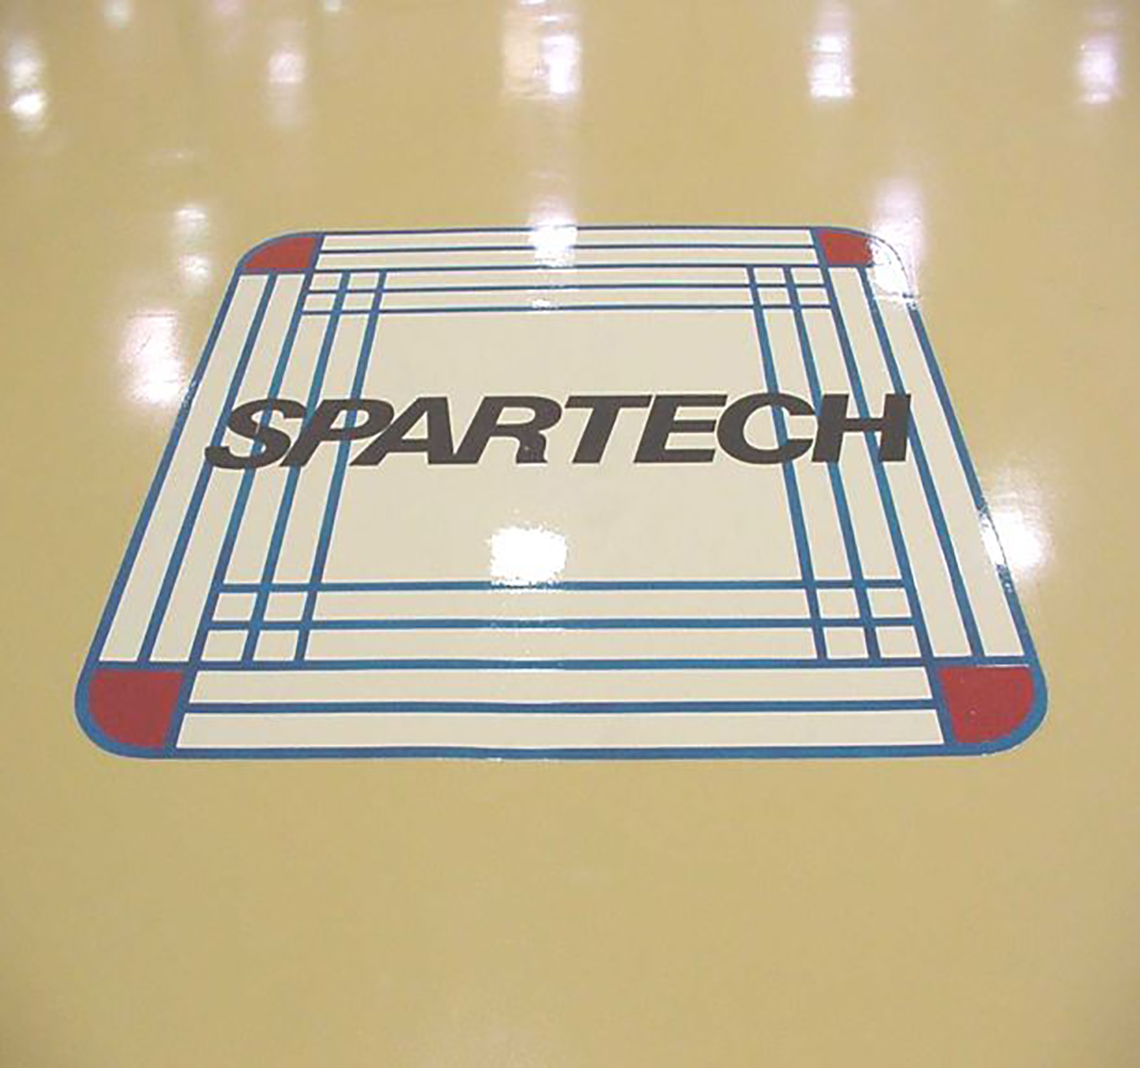 Spartech Finished floor with logo